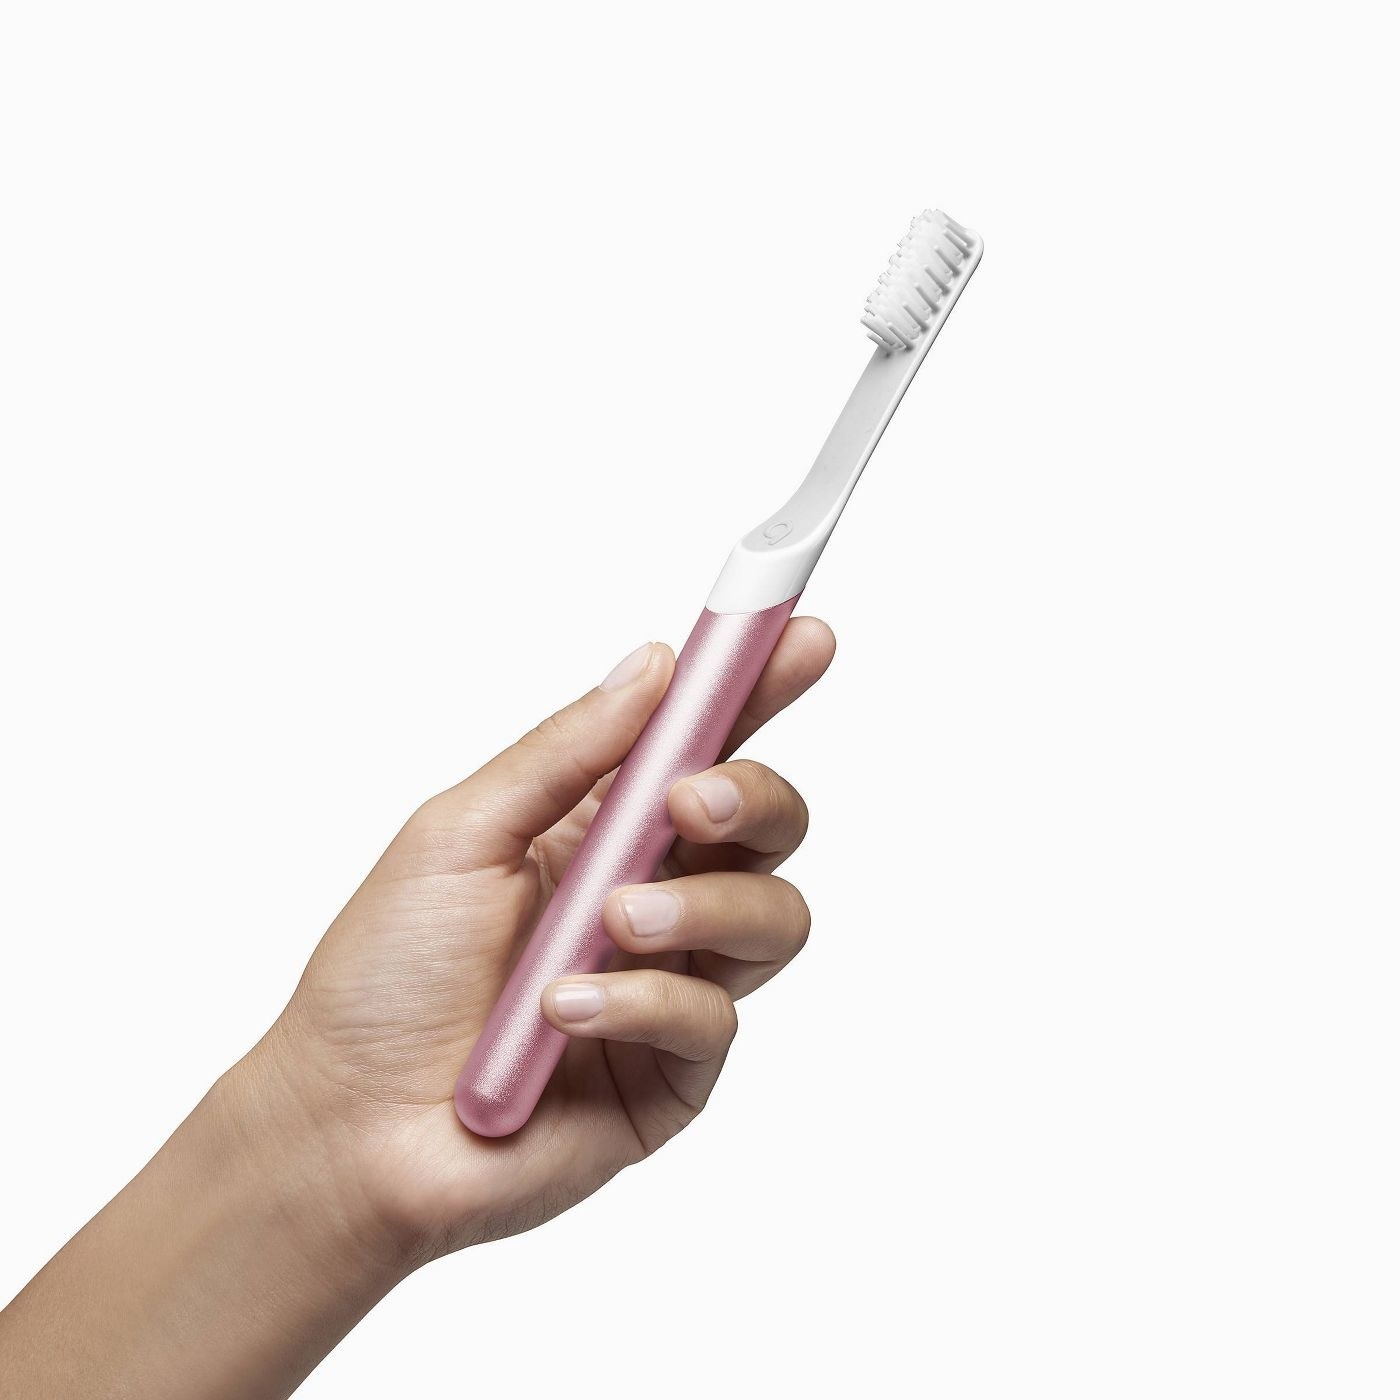 The quip toothbrush in pink